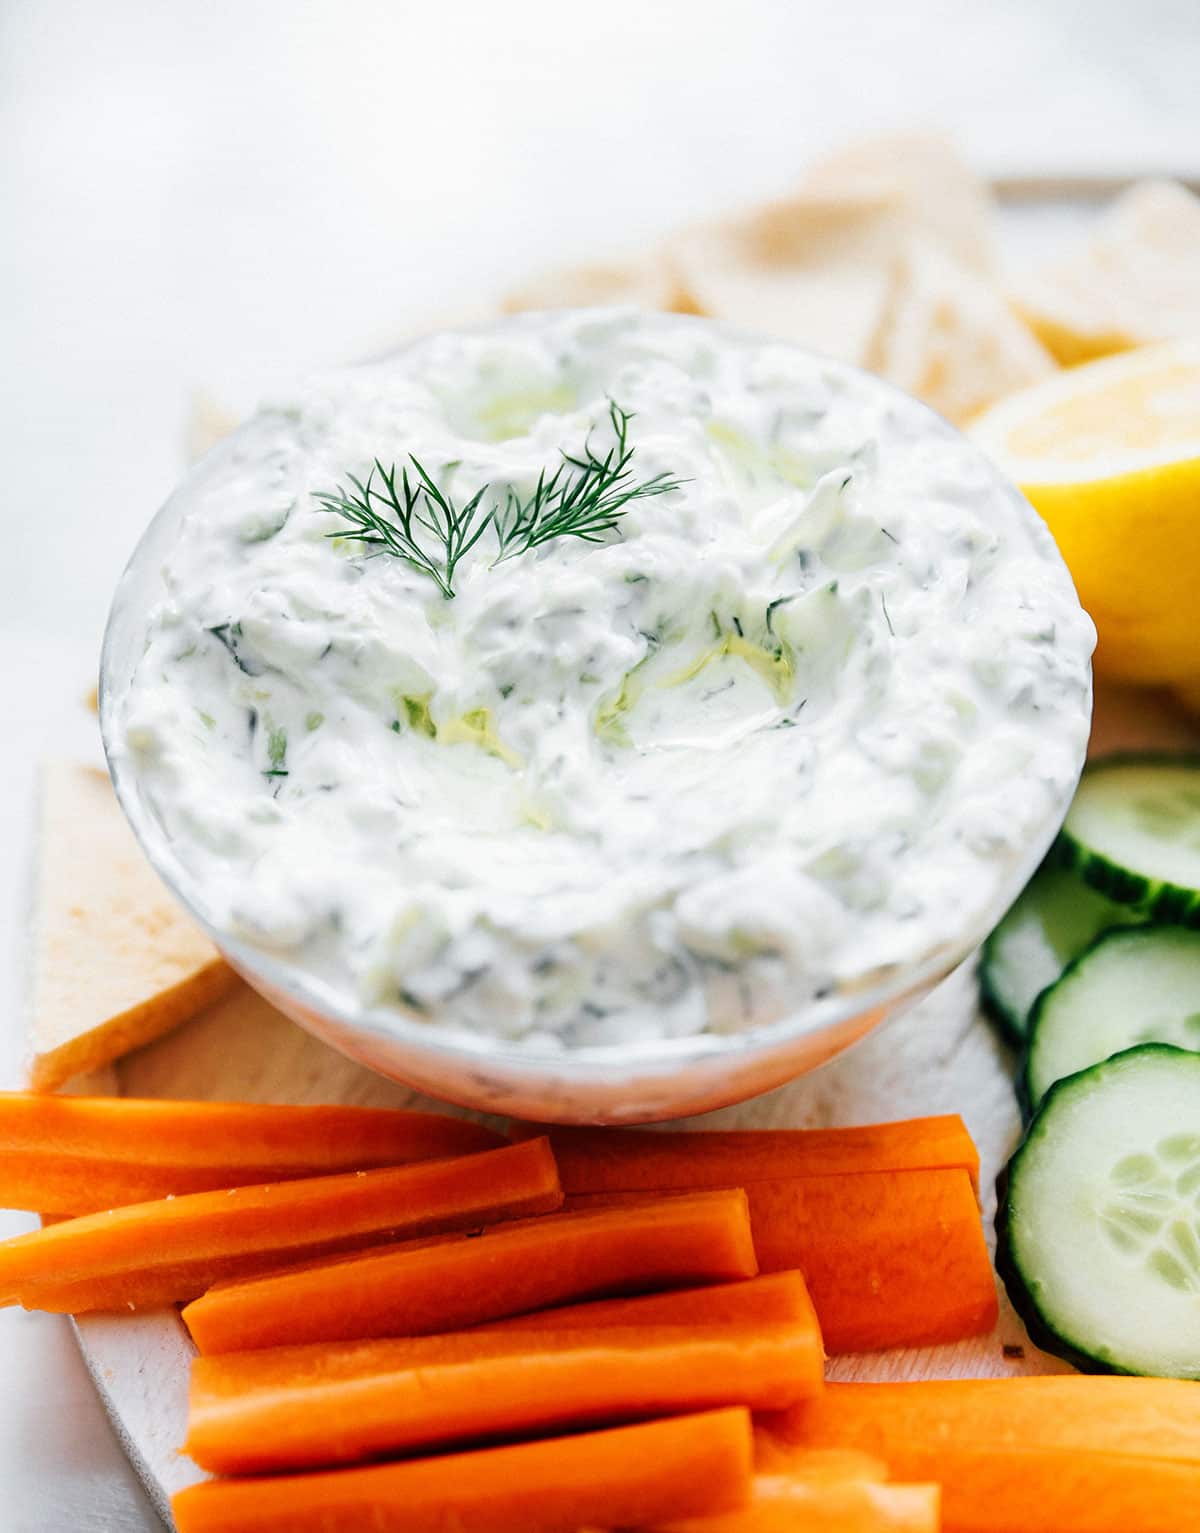 Best tzatziki recipe with pita bread and veggies on a marble table.